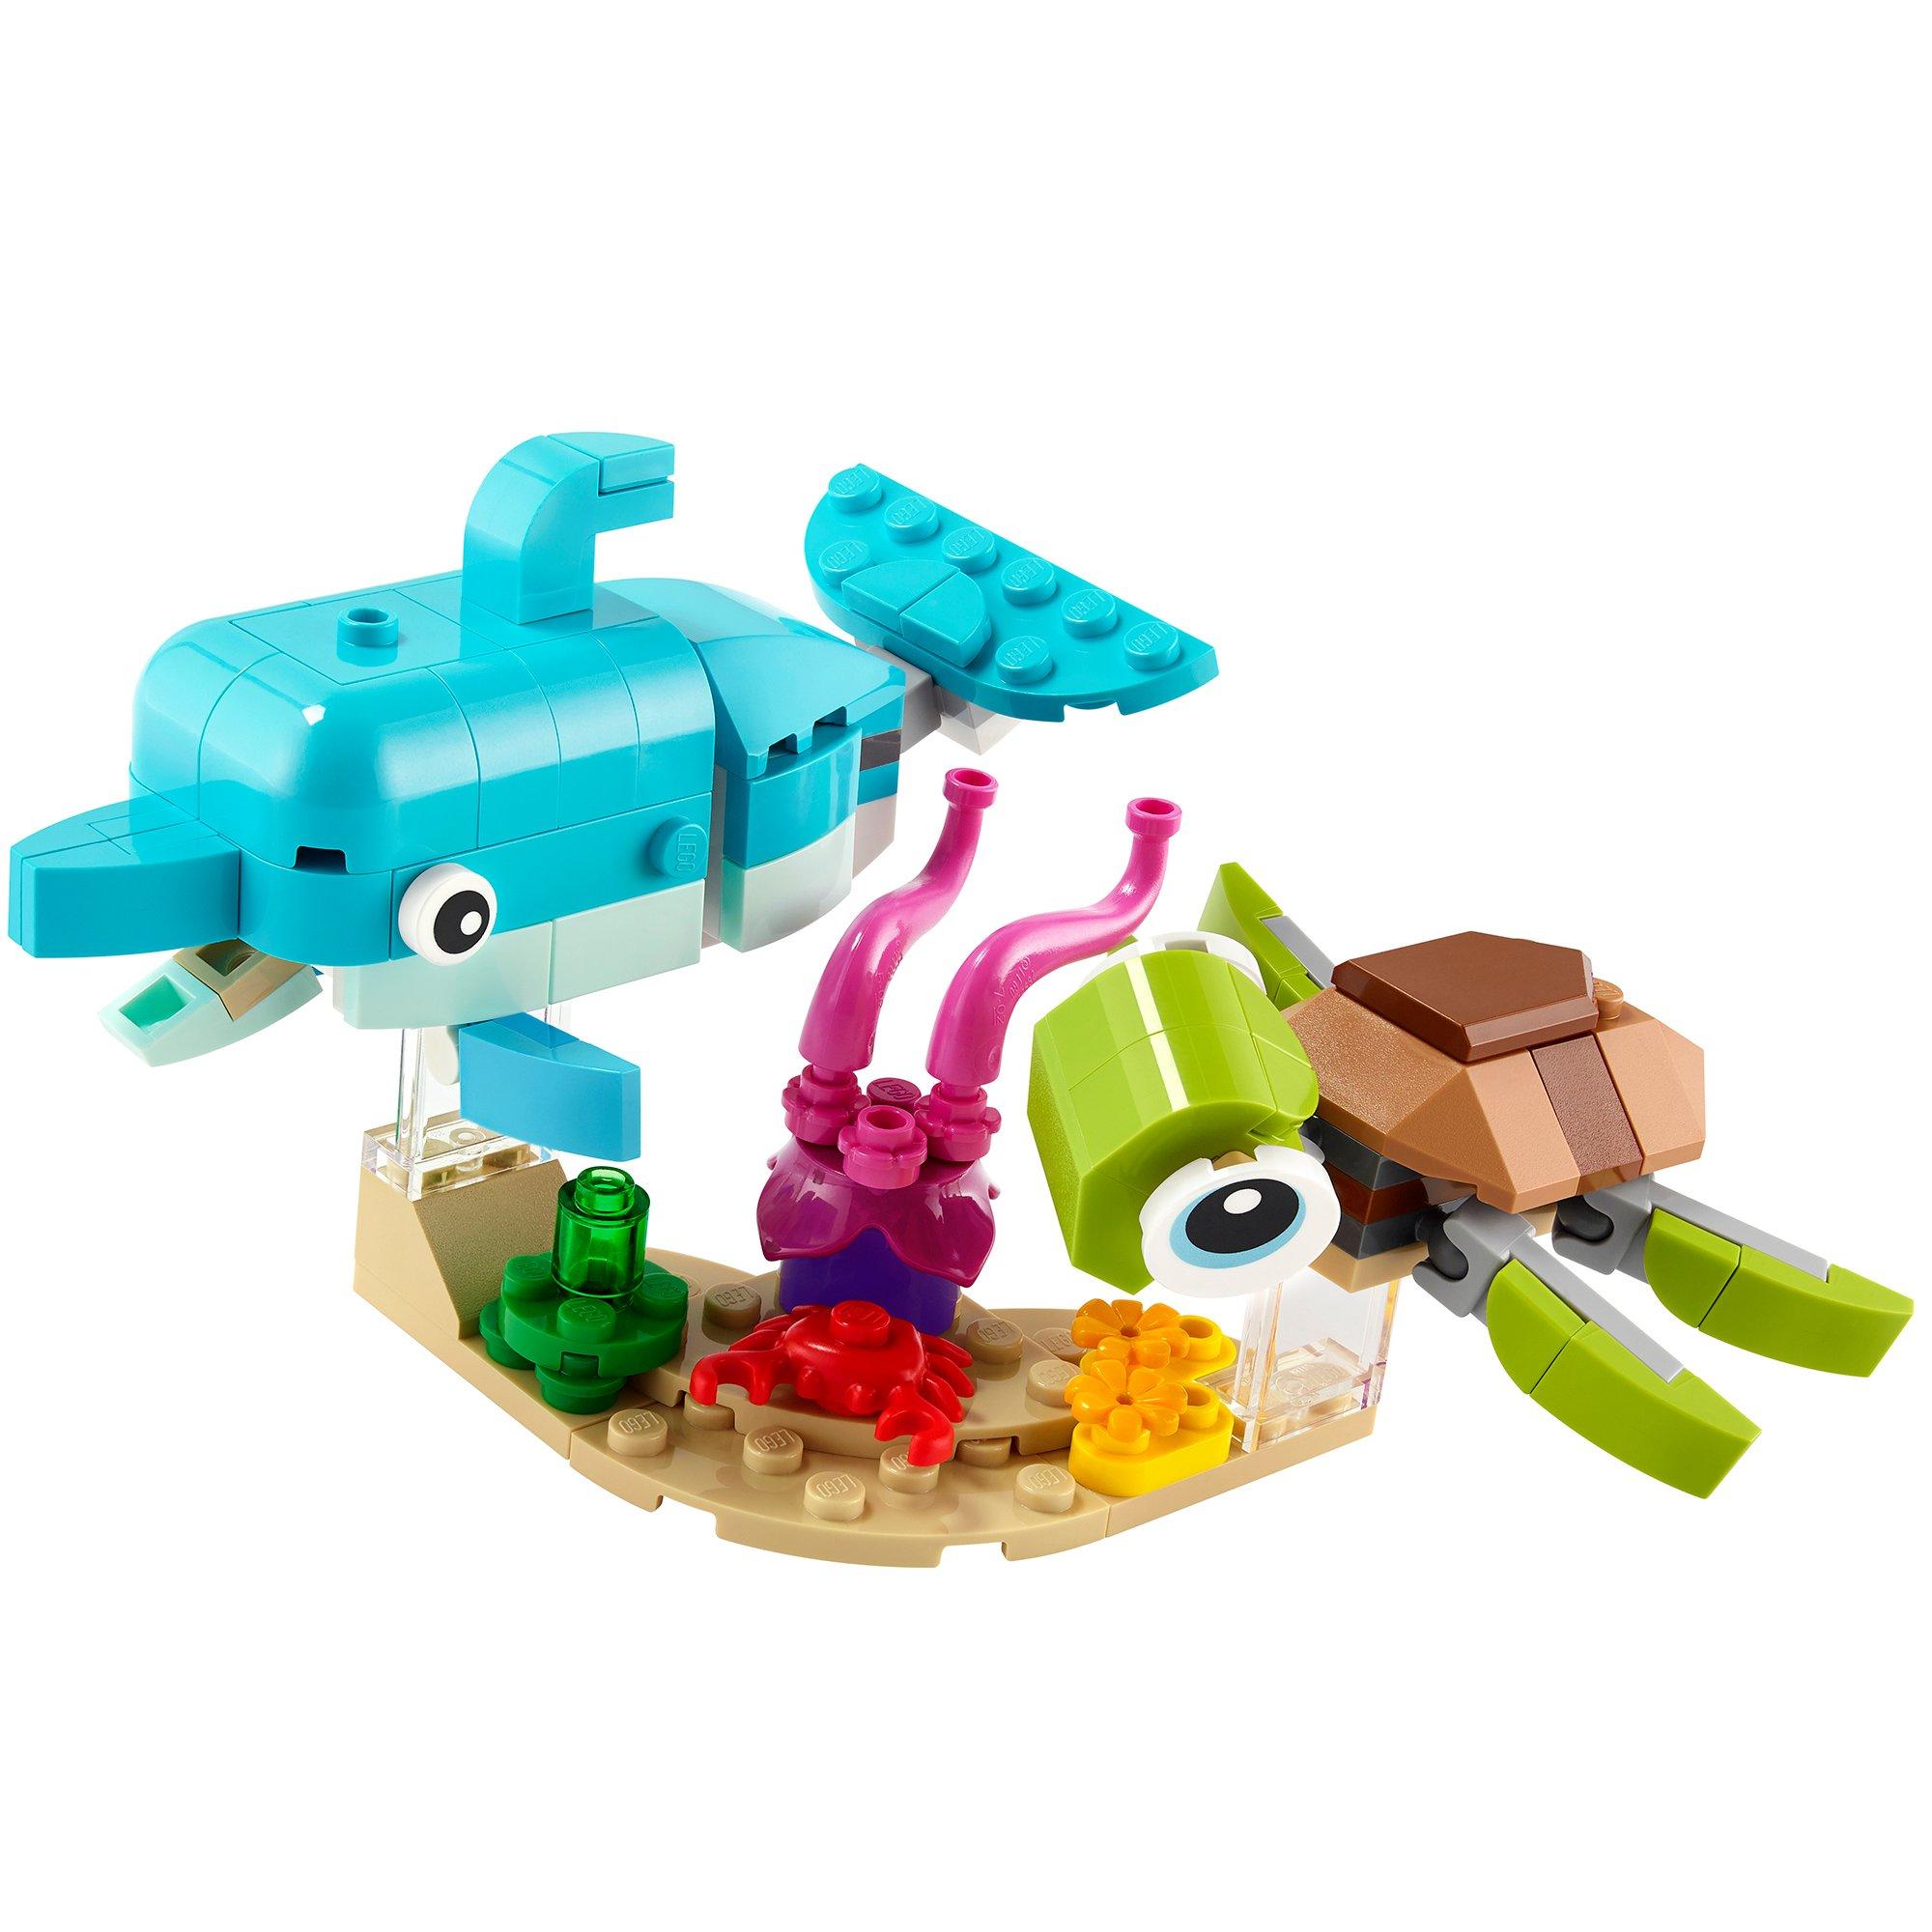 Creator 3-in-1 Dolphin And Turtle Rebuildable Lego